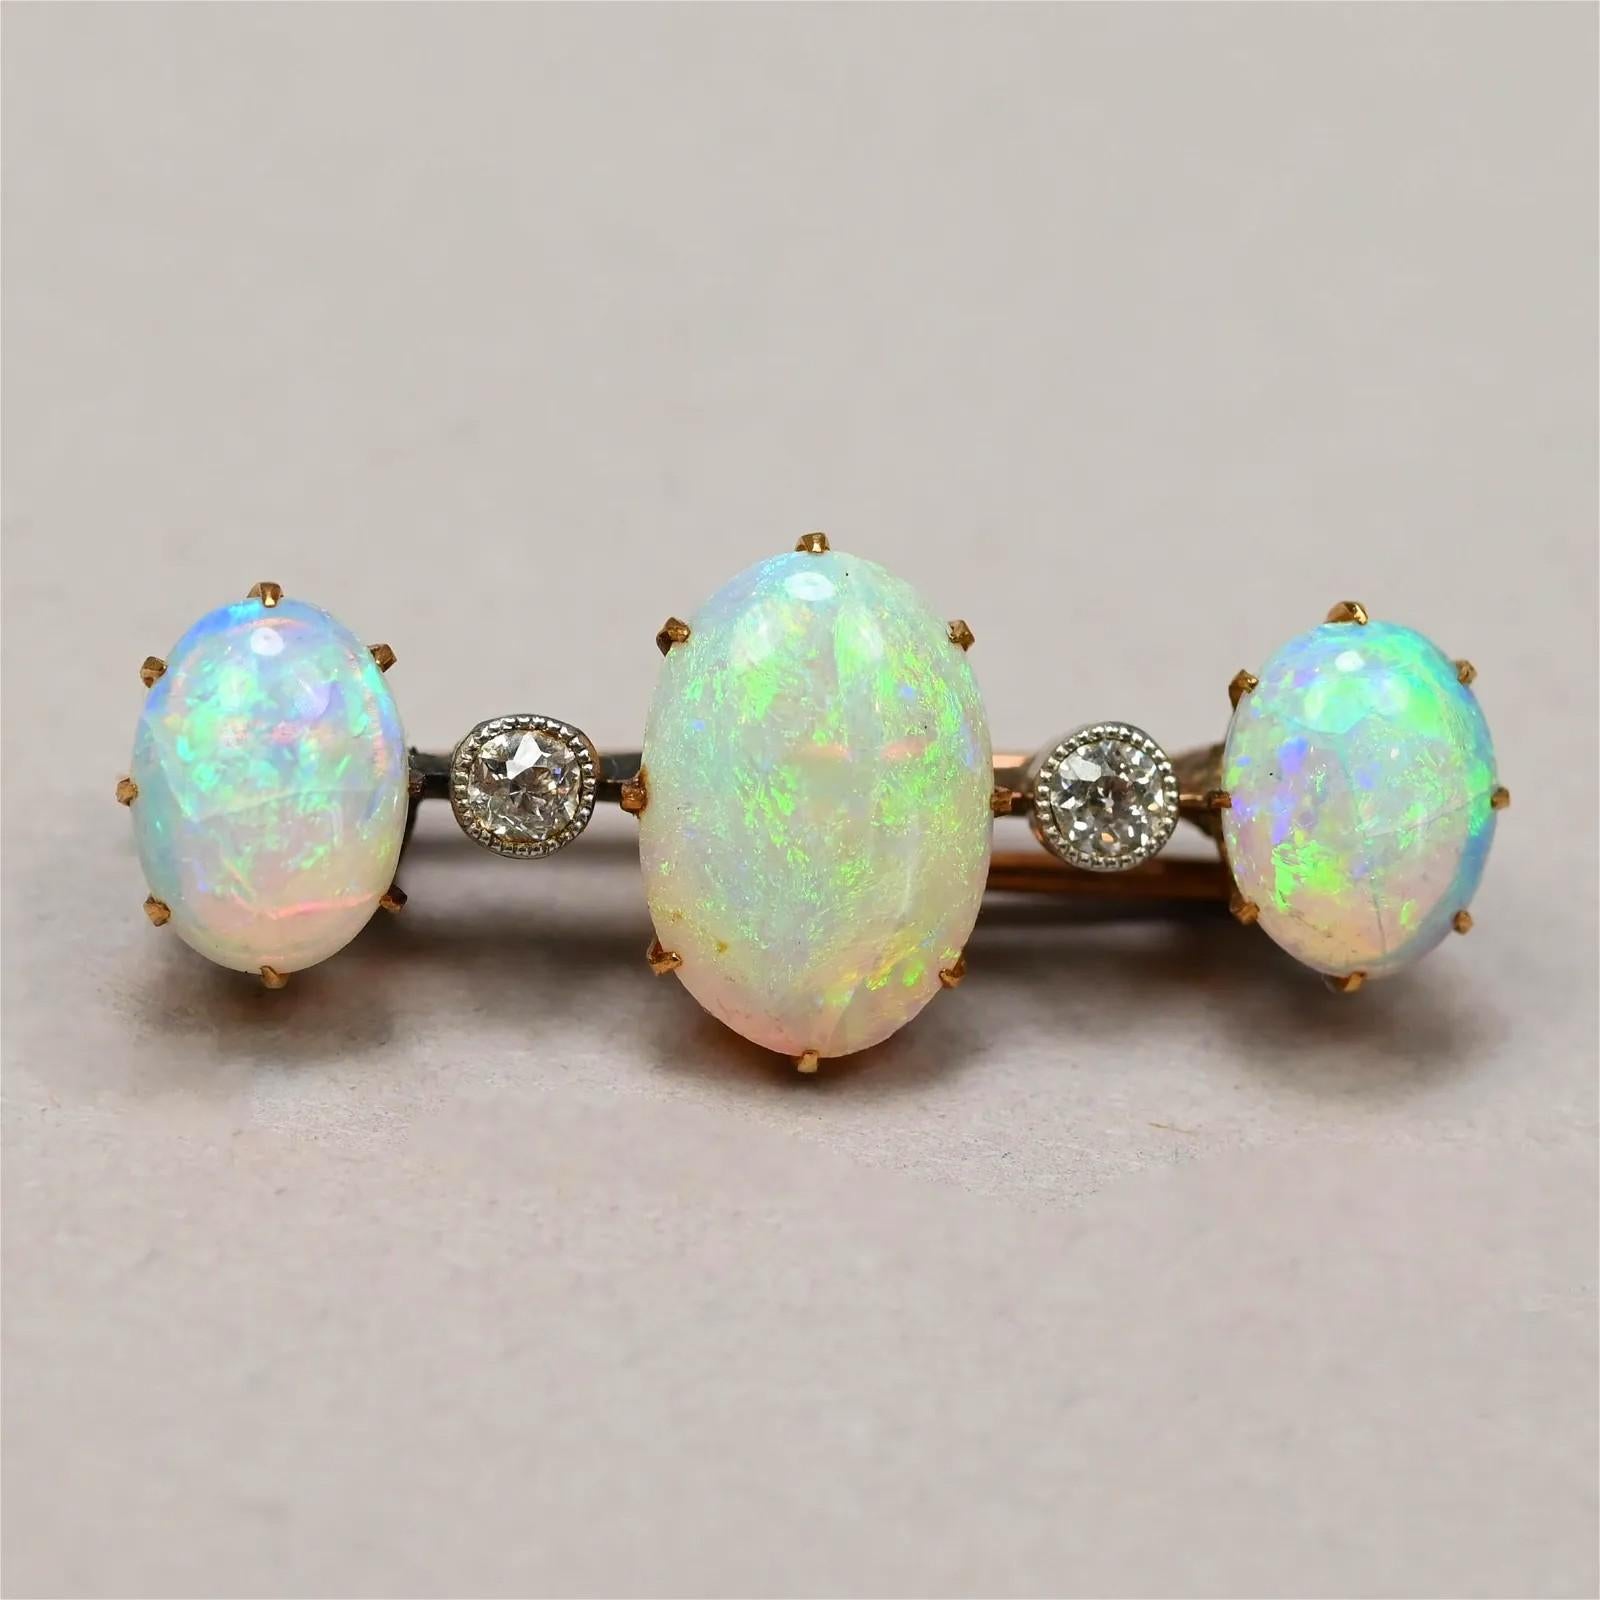 This luxurious antique Edwardian pin brooch circa 1880-1917 makes an exquisite addition to your collection. Boasting three prong-set oval opals cabochons with a gorgeous blue, violet, and peach play-of-color and a green flash, and two sparking